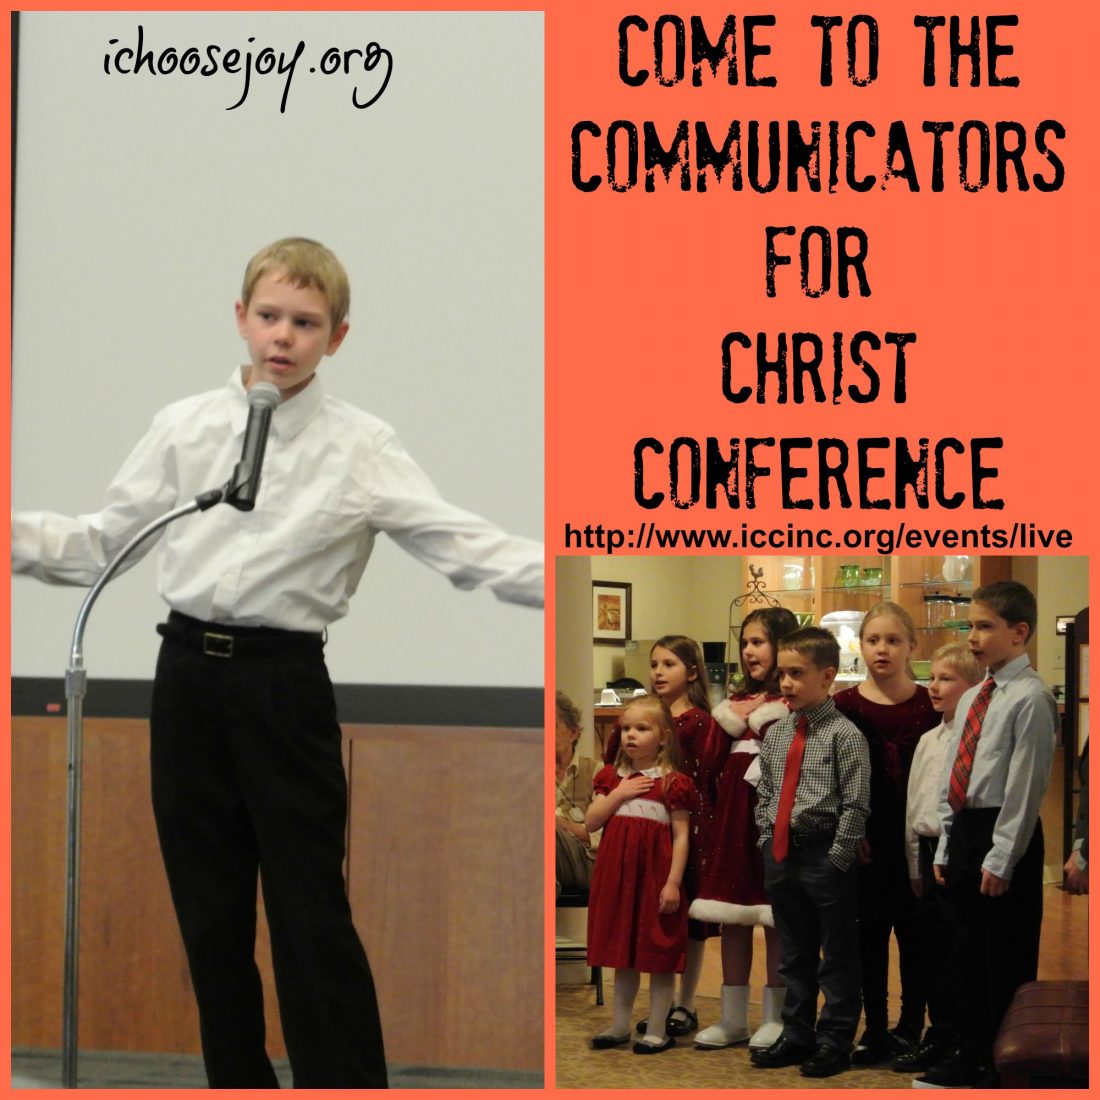 Come to the Communicators for Christ Conference!